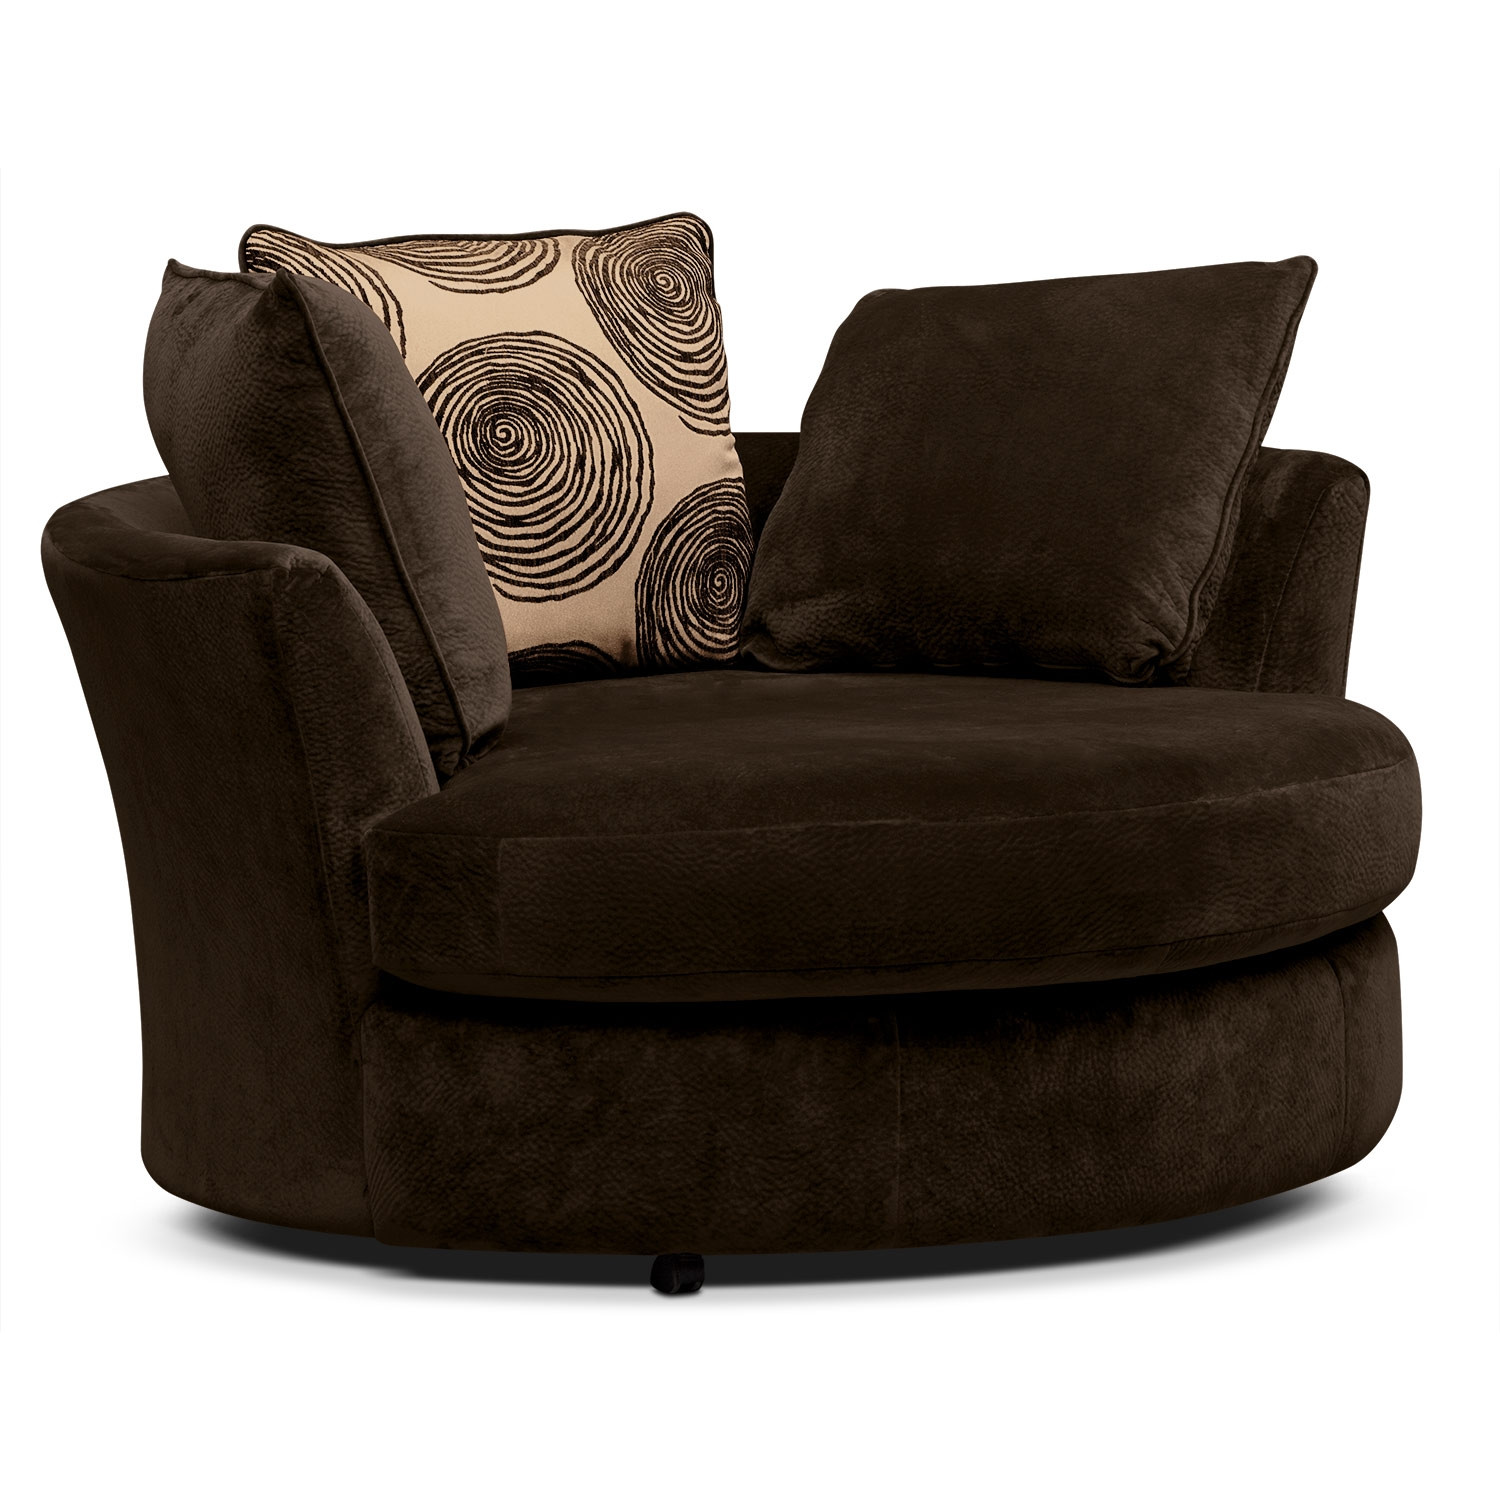 Swivel Living Room Chair
 Round sofa chairs upholstered swivel chairs for living